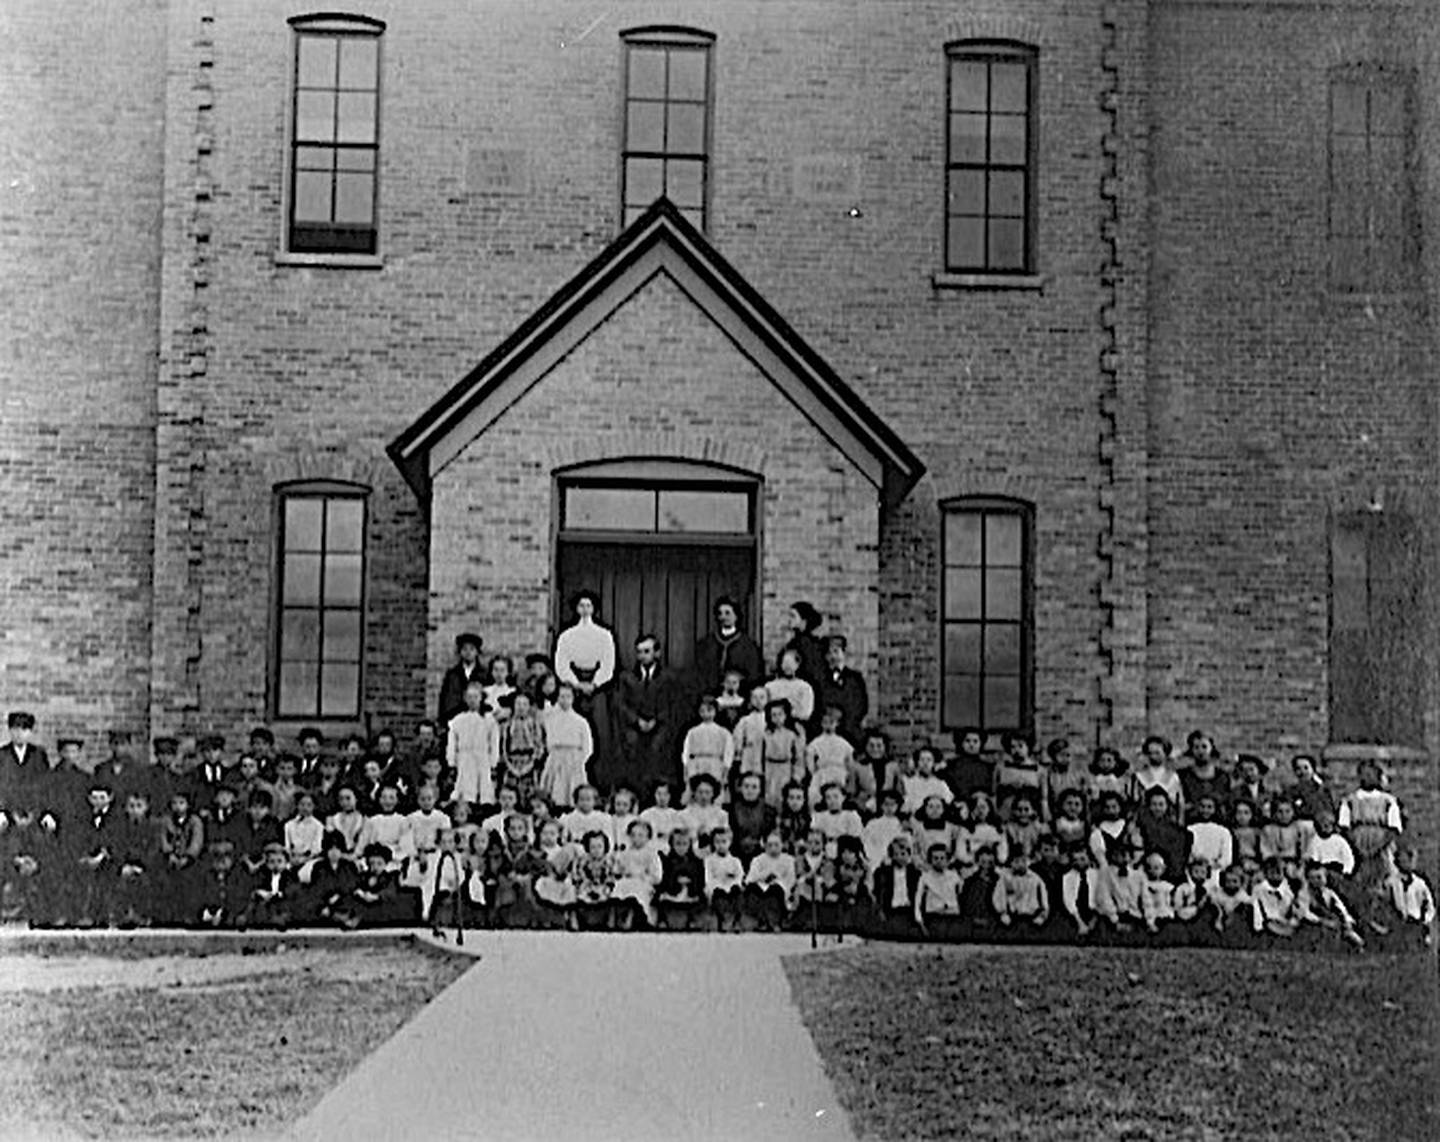 1930 class picture at Cary Public School, which later became the August Kraus Senior Center.